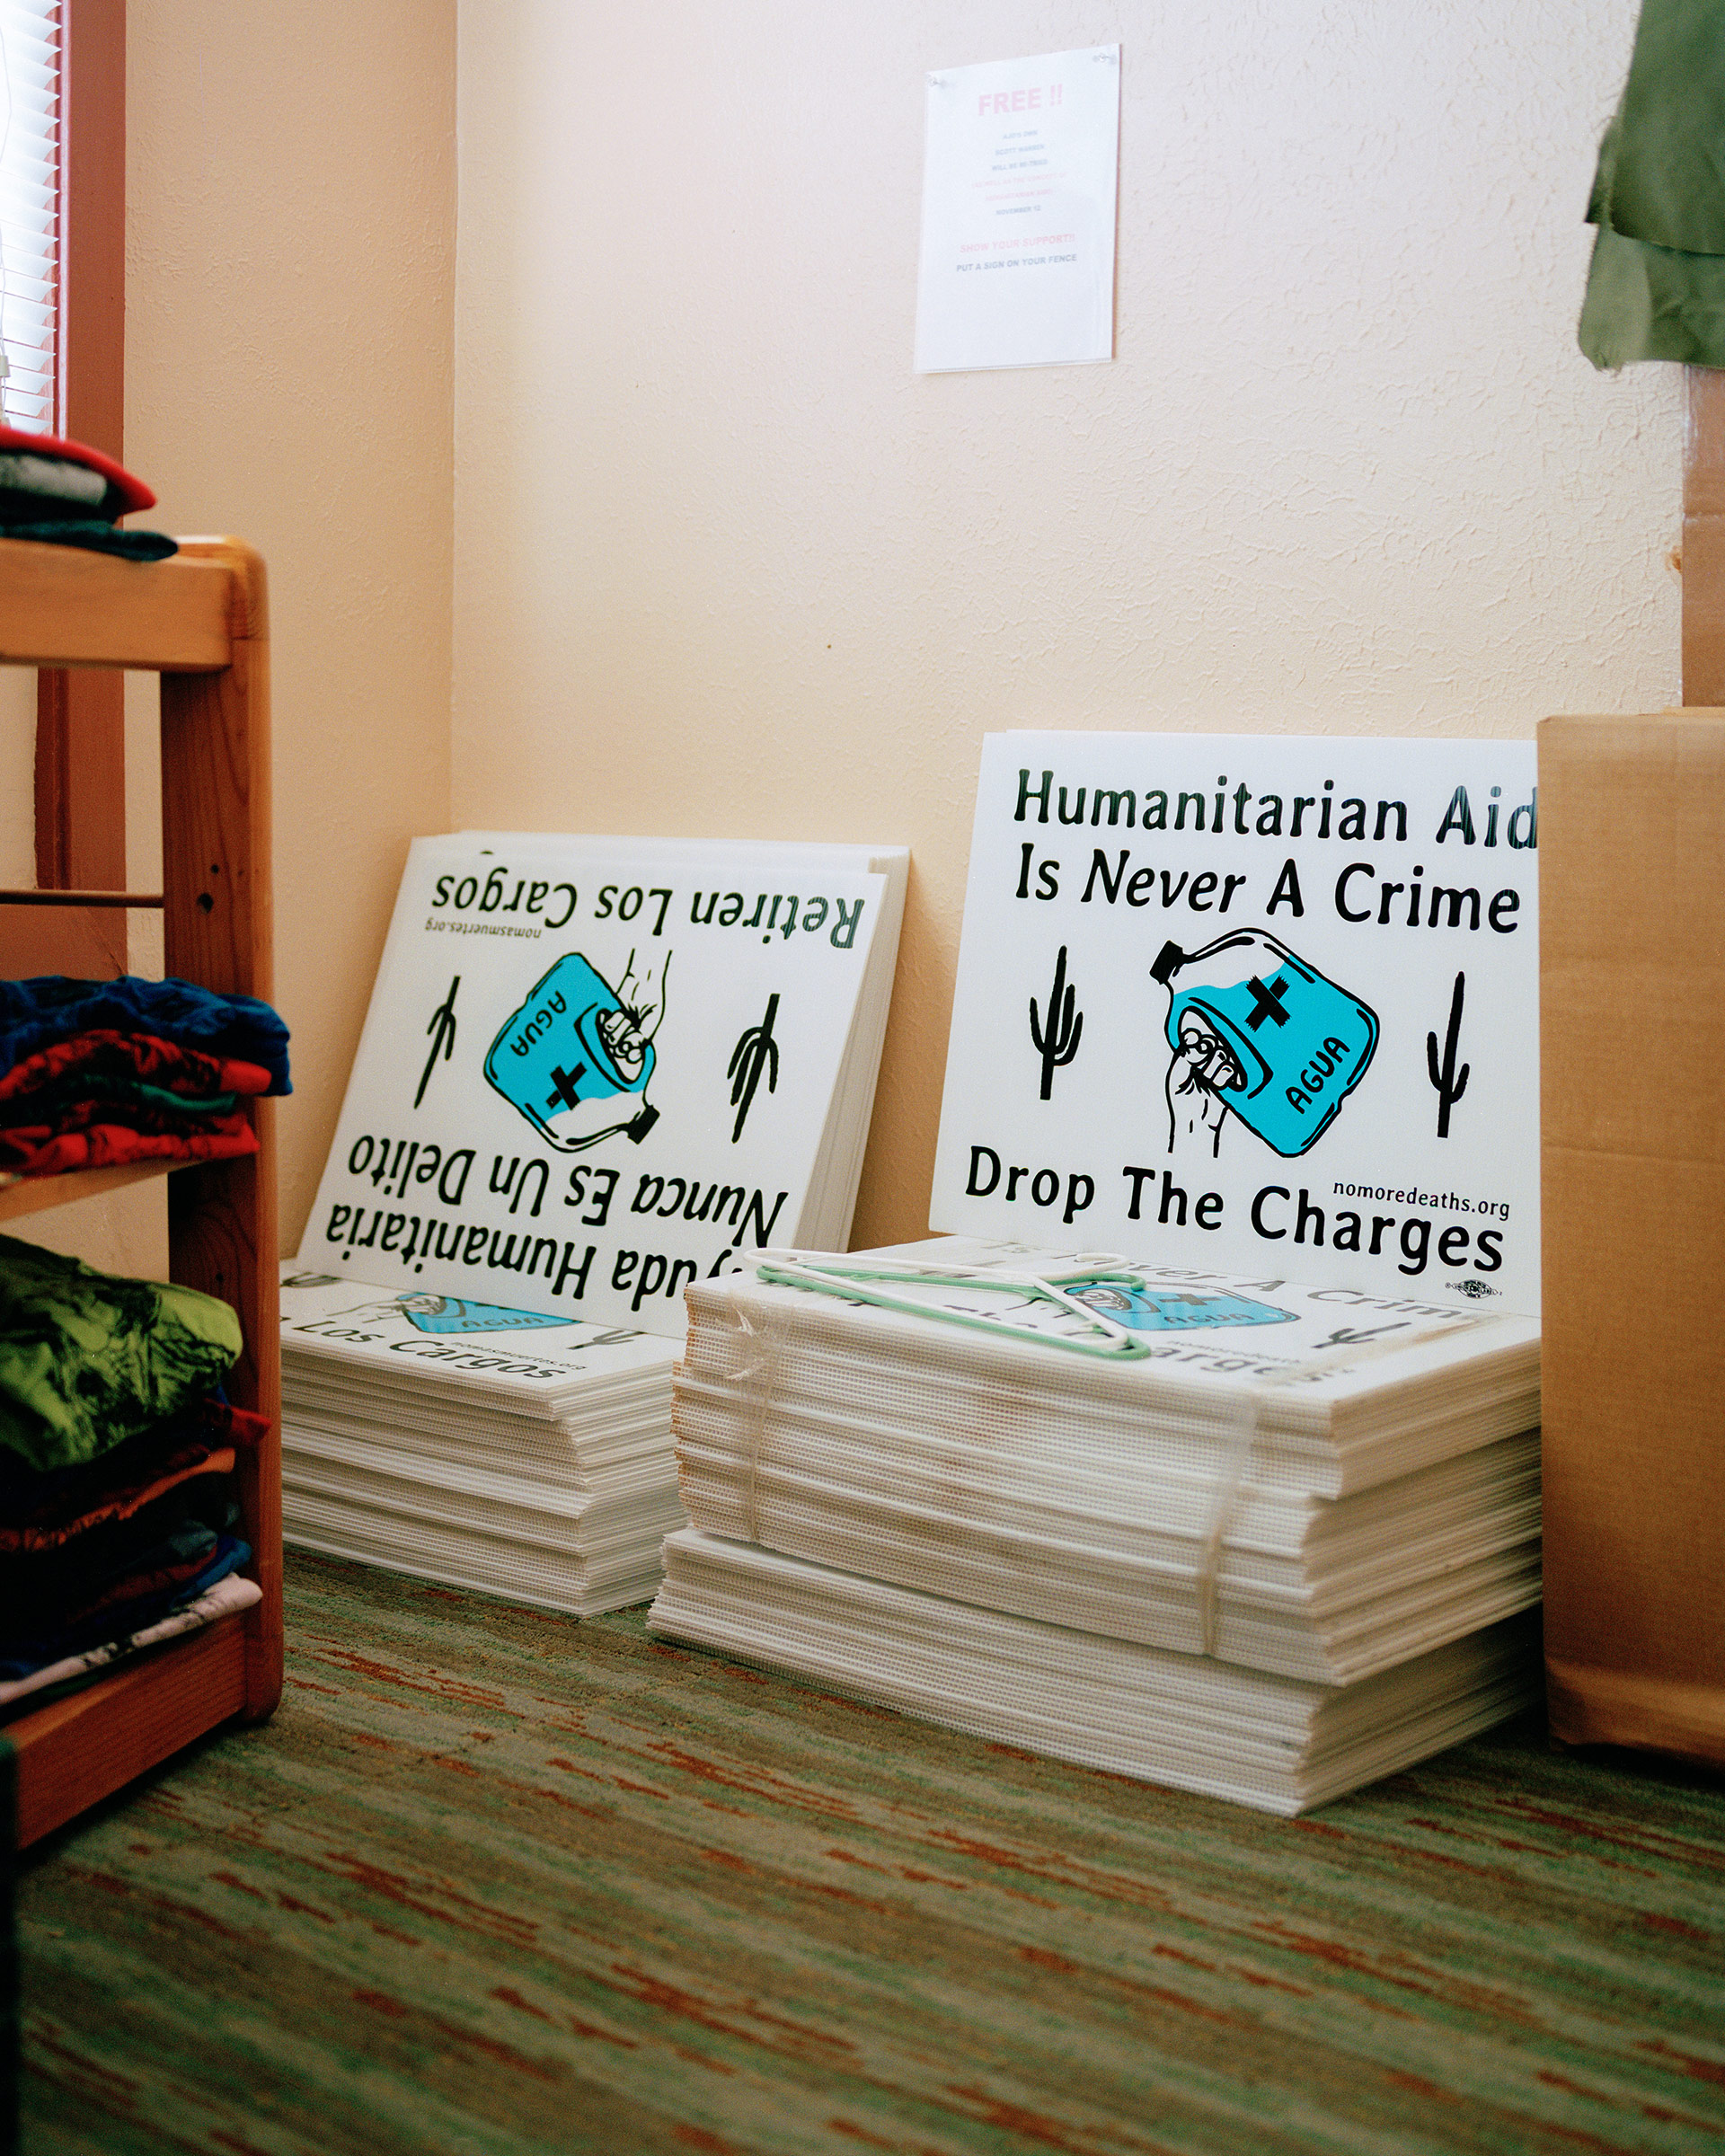 Signs in support of Warren that are available for businesses and homes sit in the Ajo Humanitarian Aid Office on Sept. 17. (Cassidy Araiza for TIME)